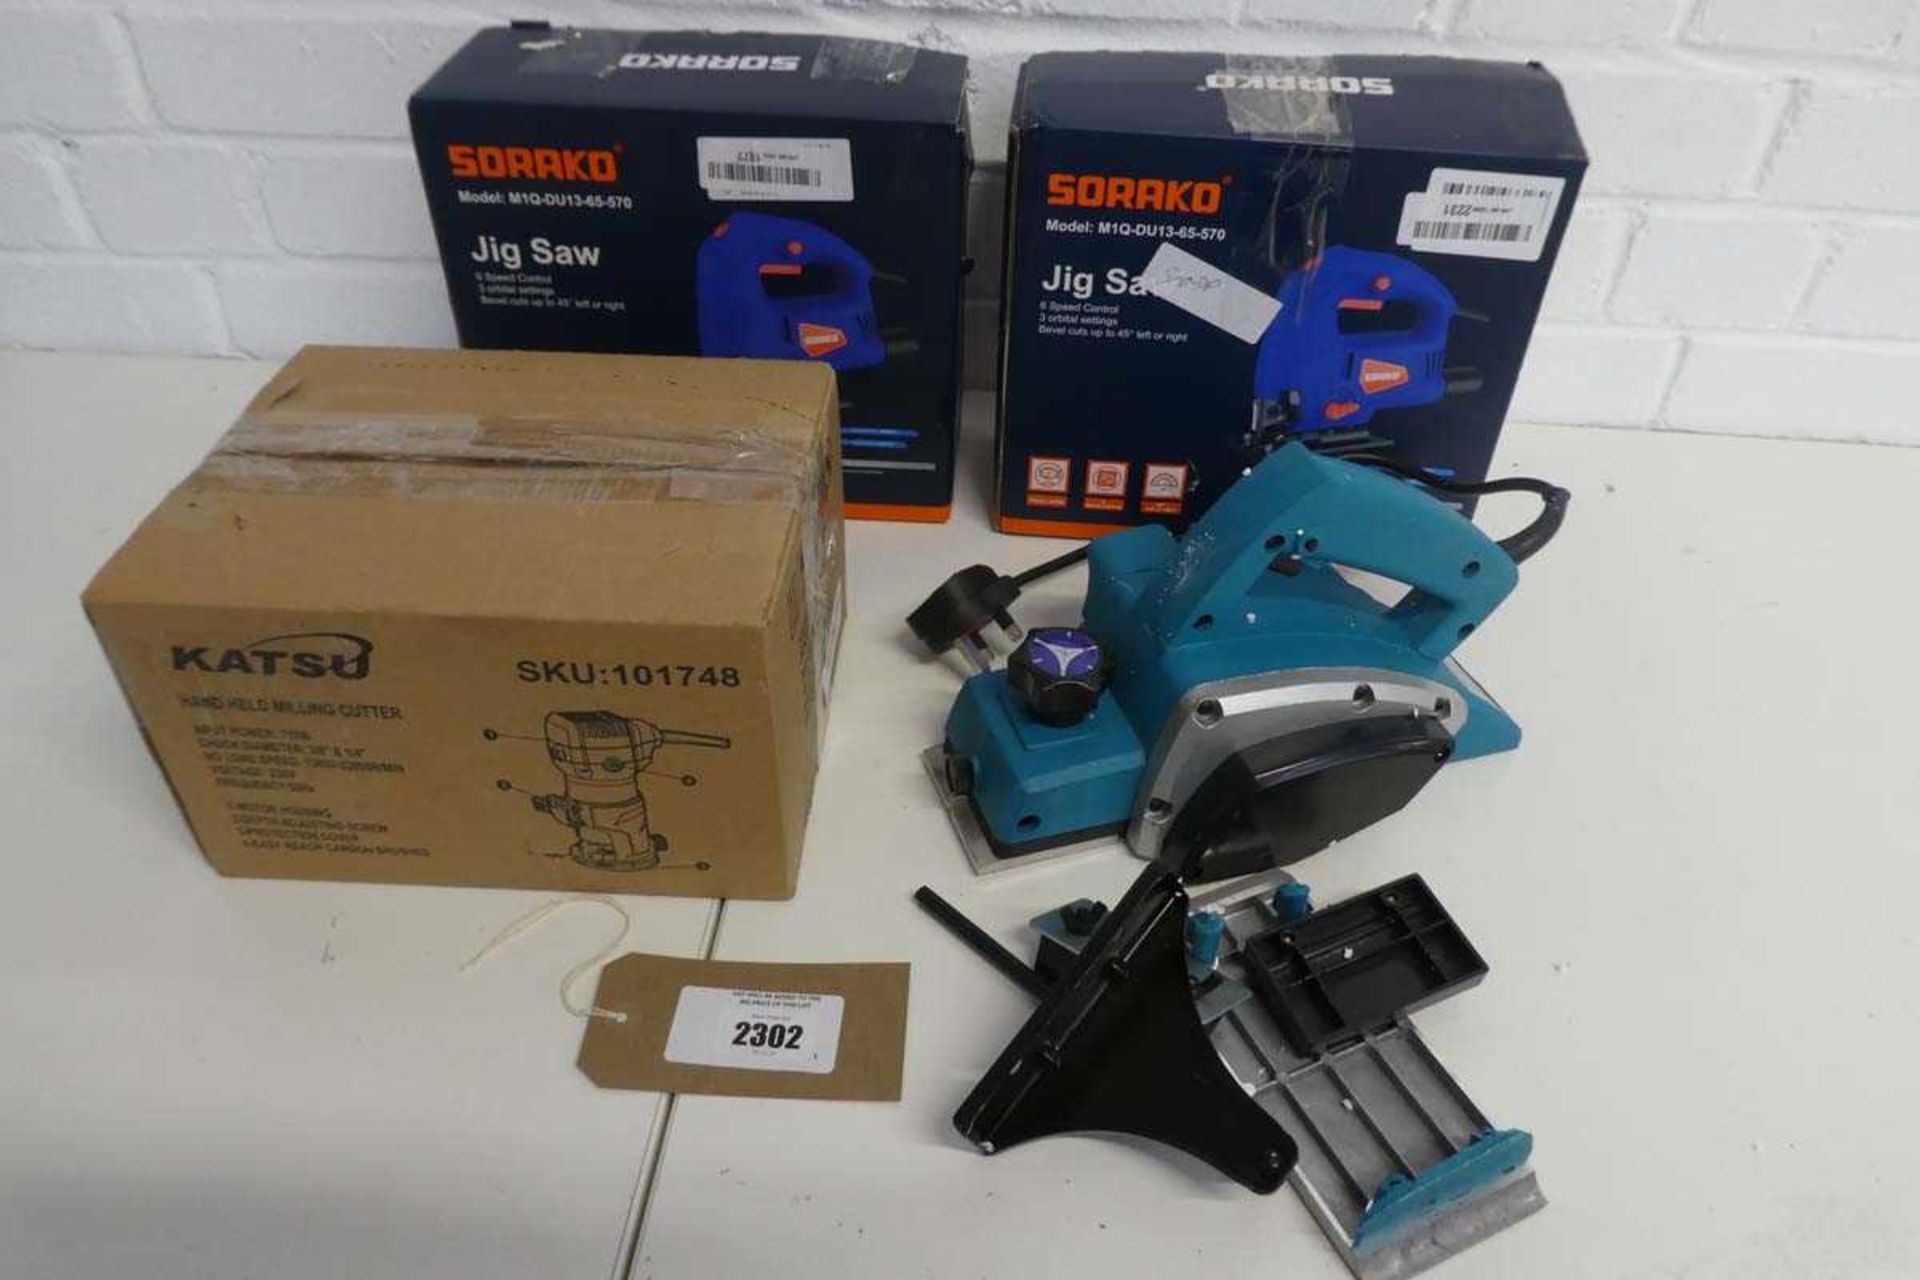 +VAT 2 Sorako electric jig saws with electric planer and boxed Katsu hand held milling cutter